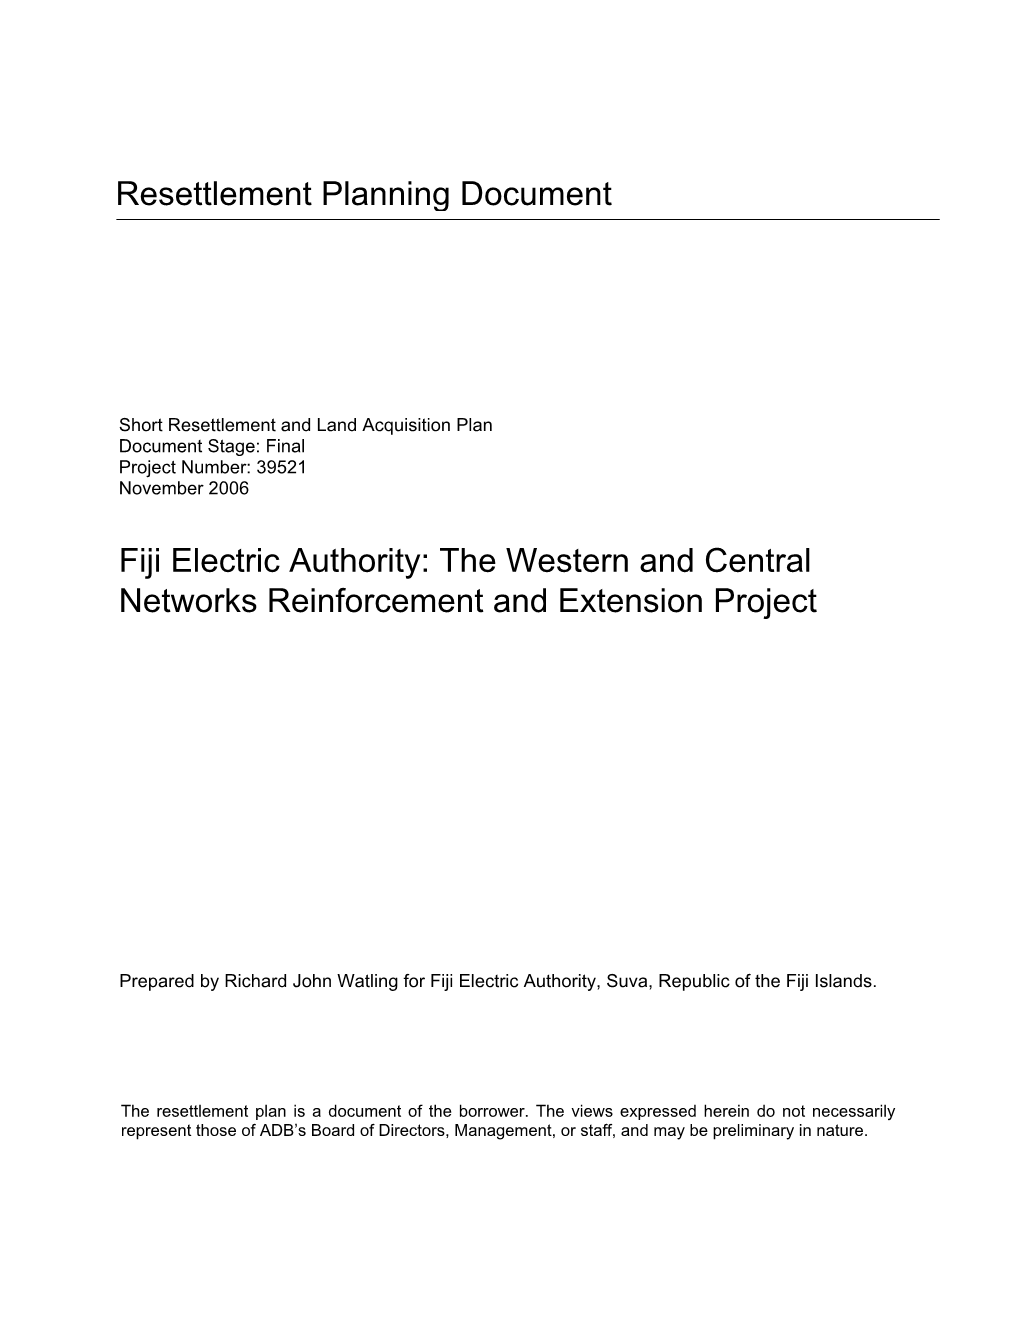 Resettlement Planning Document Fiji Electric Authority: the Western And